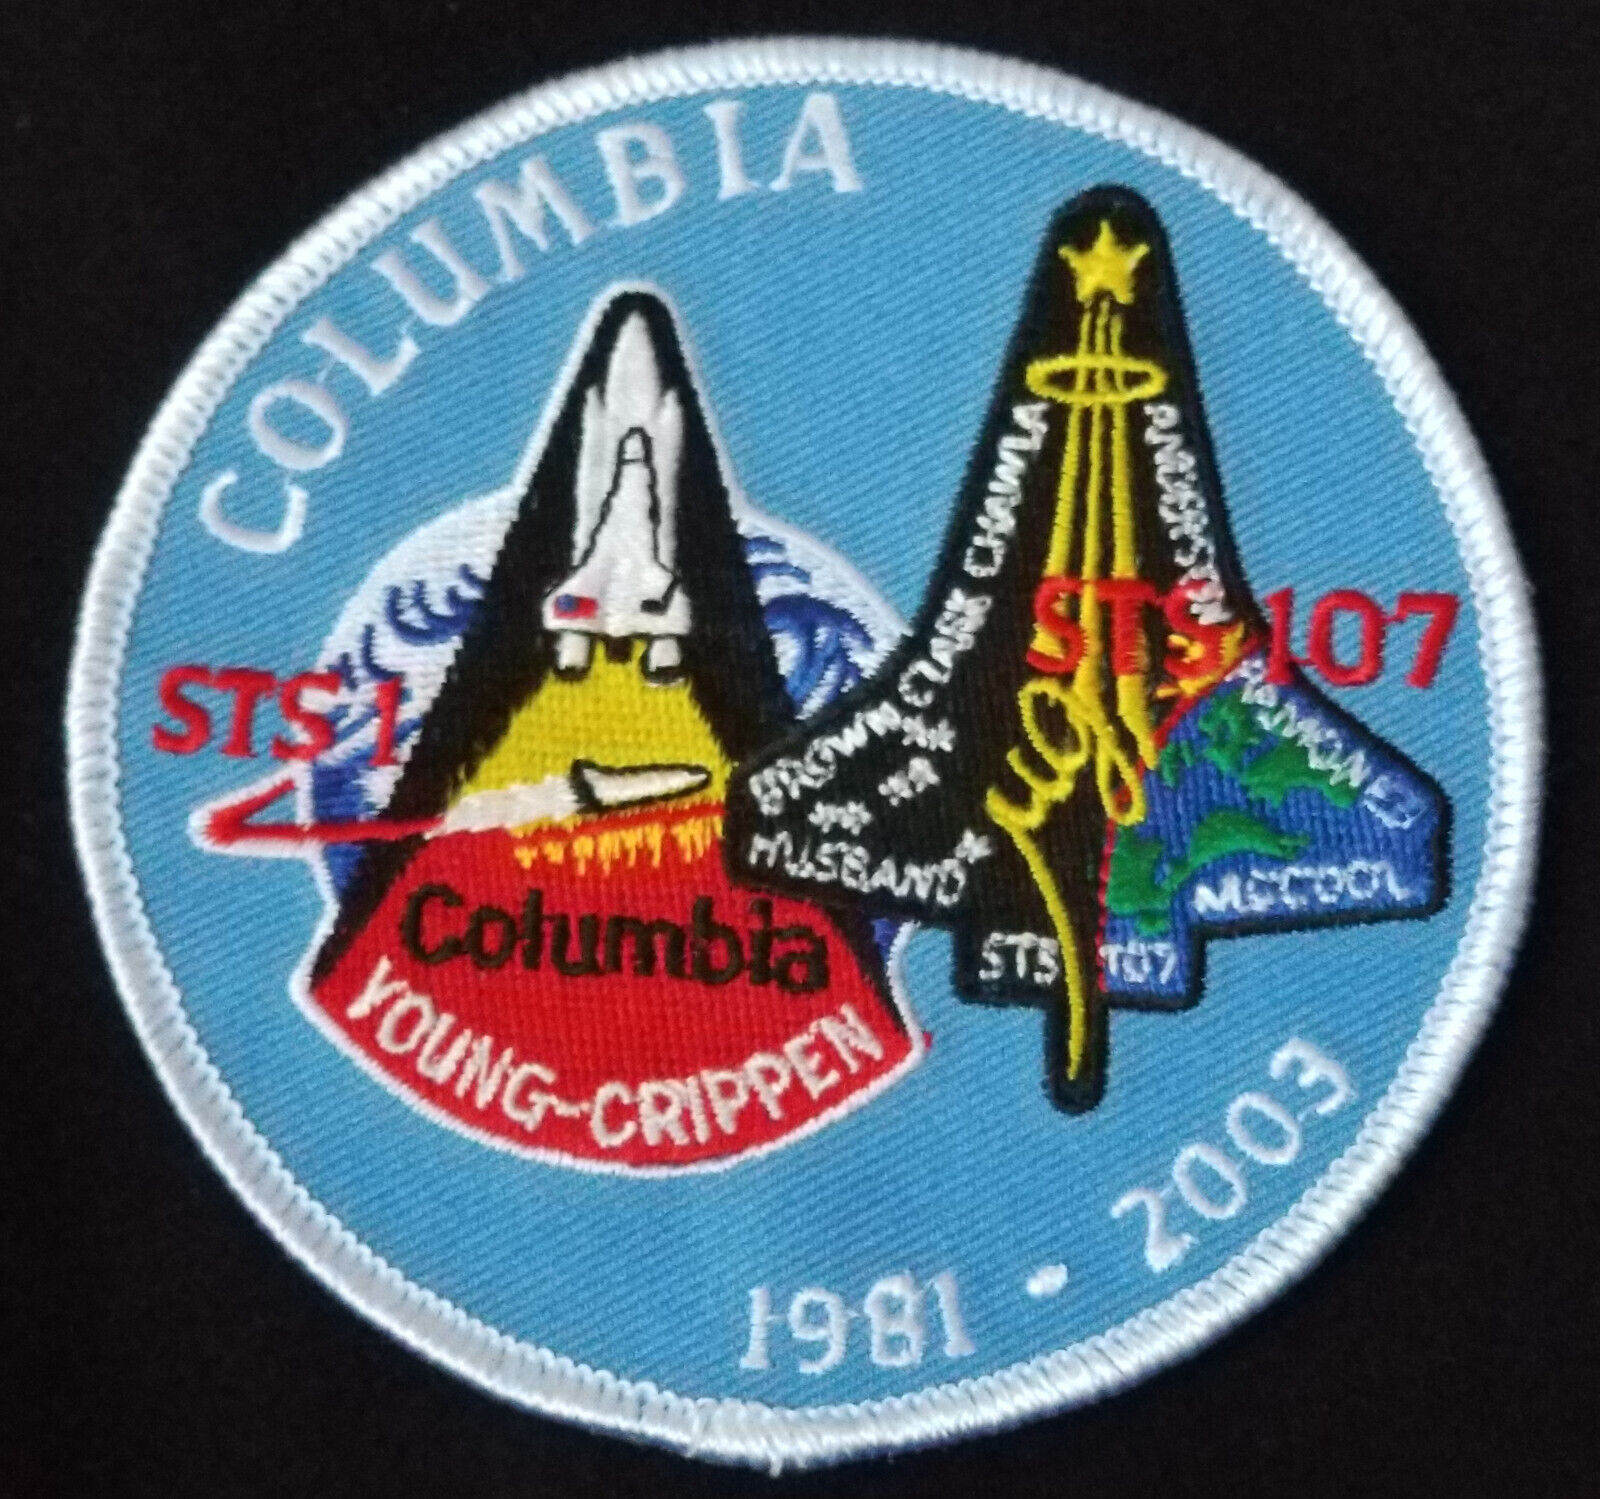 AUTHENTIC Original Boeing/NASA Space Shuttle Columbia STS1 & STS-107 Patch